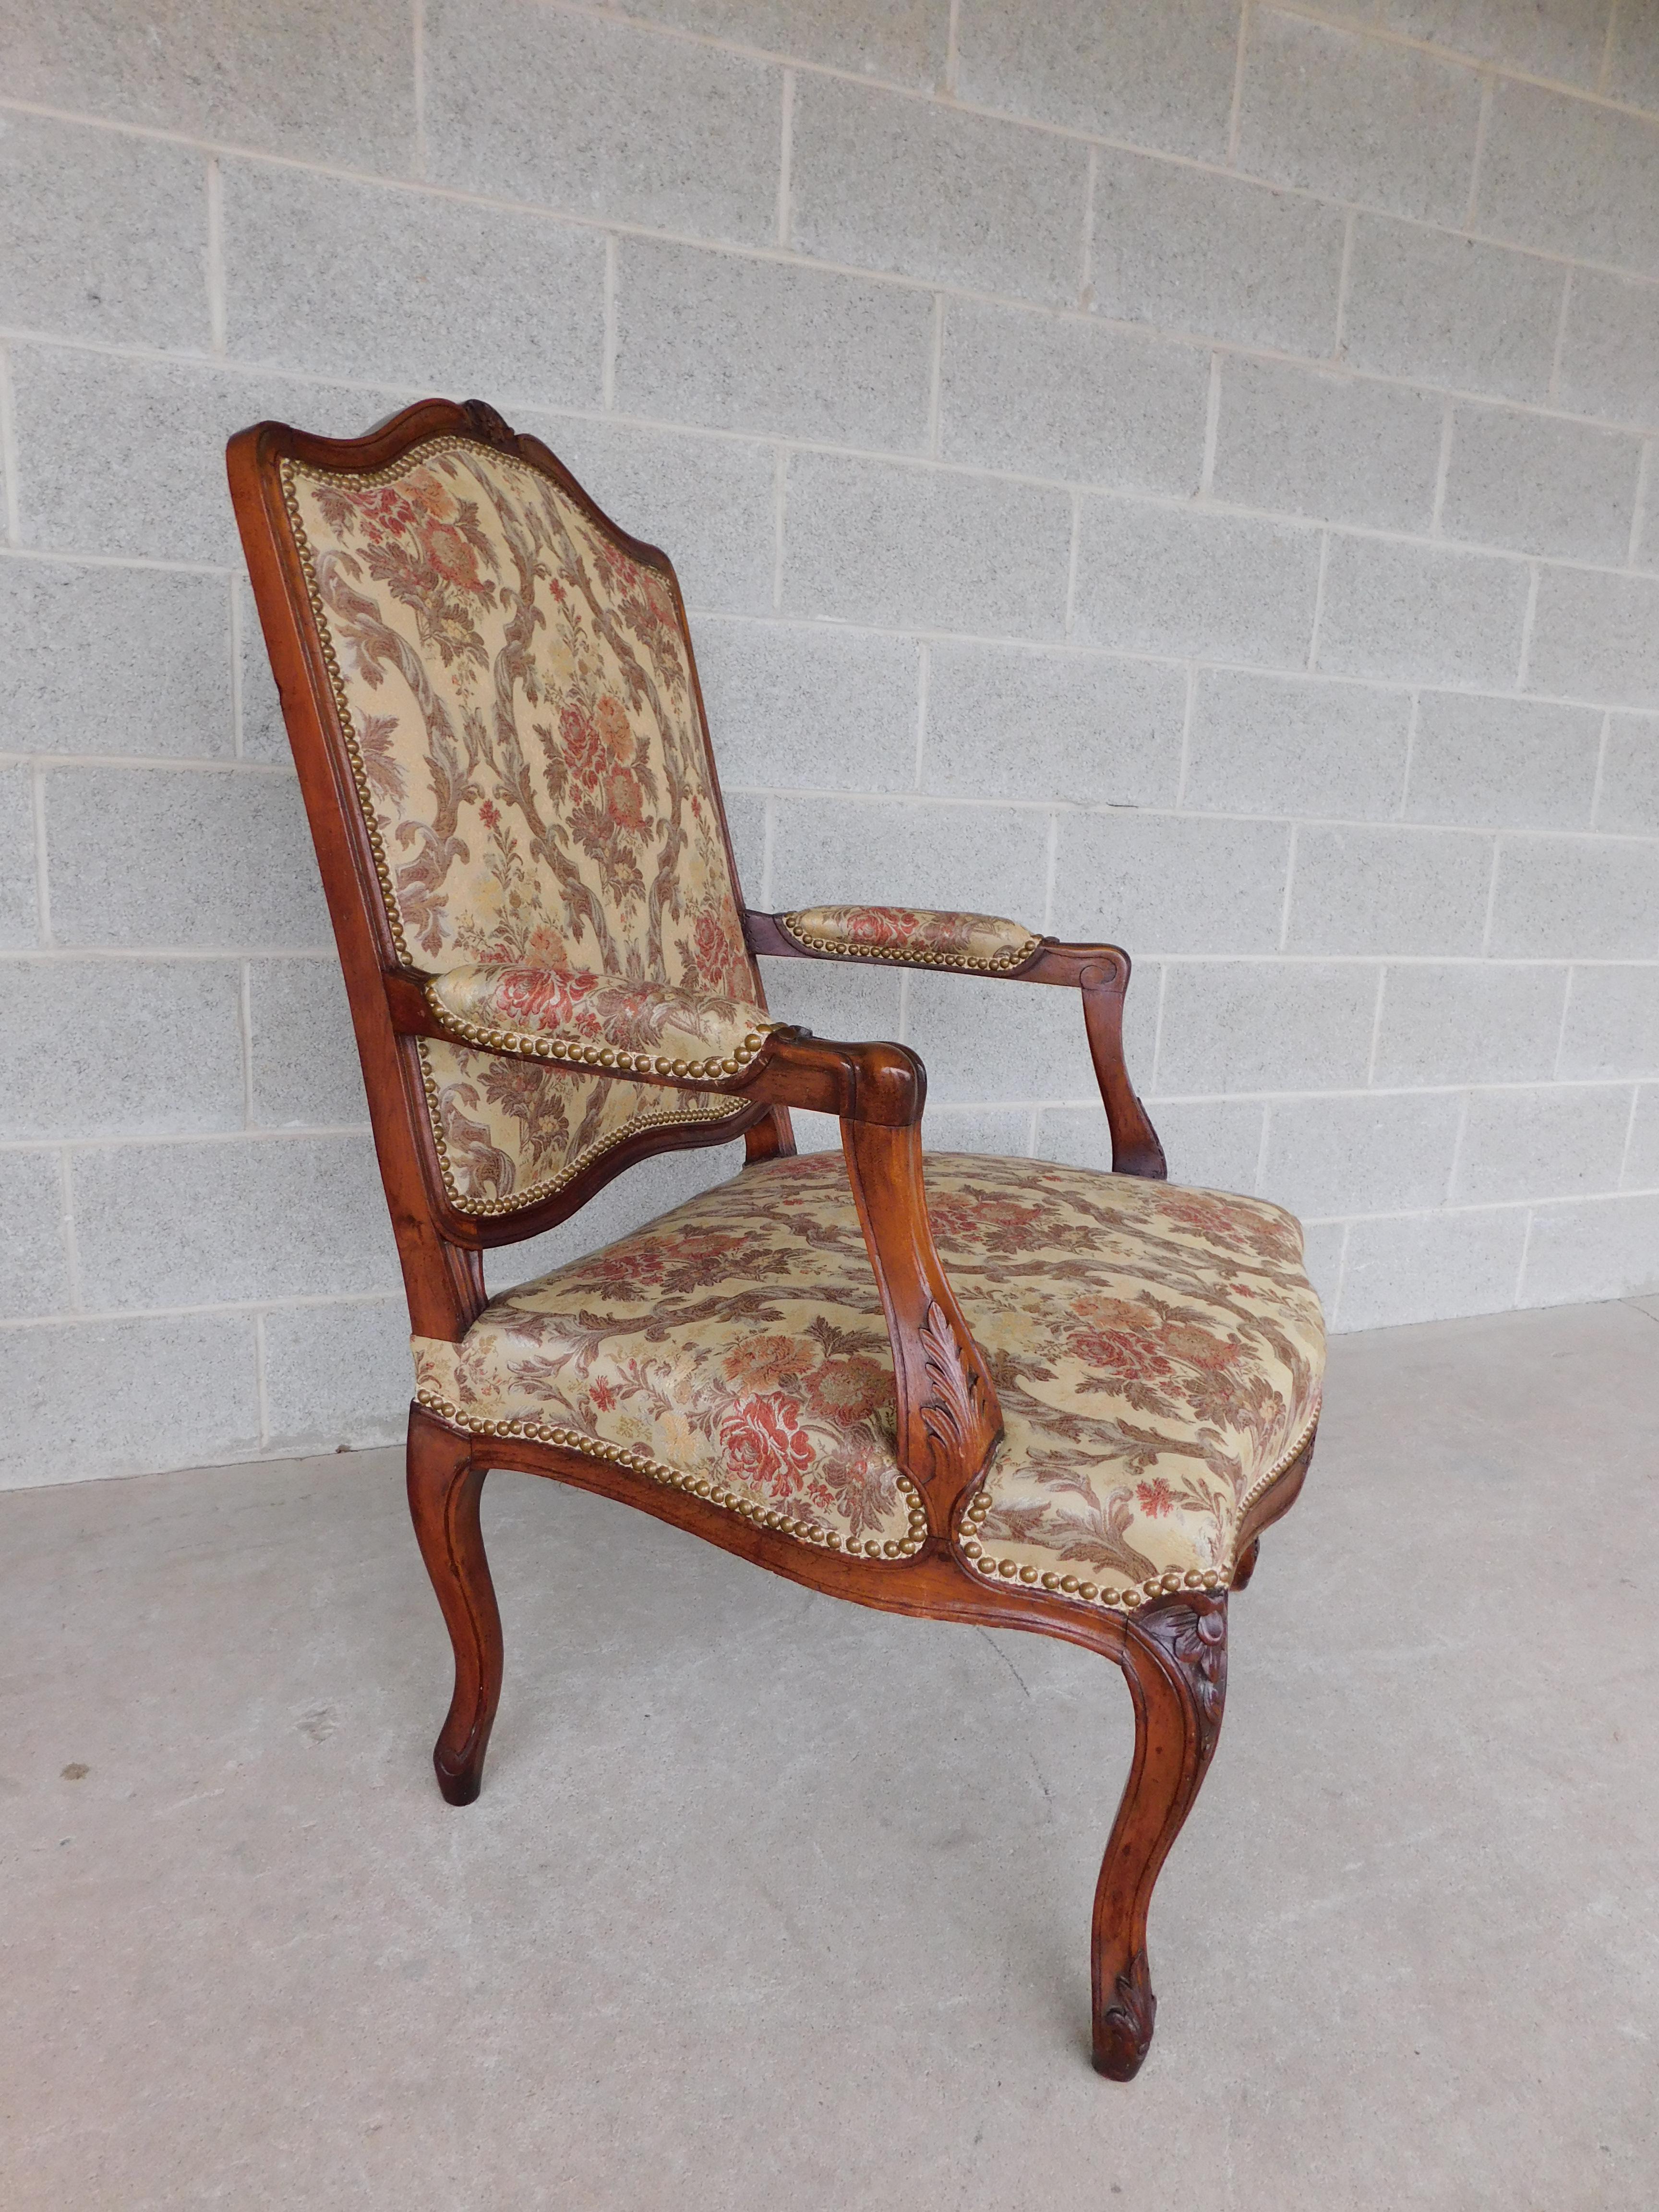 Vintage French Louis XV Style Fauteuil Chairs  - a Pair For Sale 3